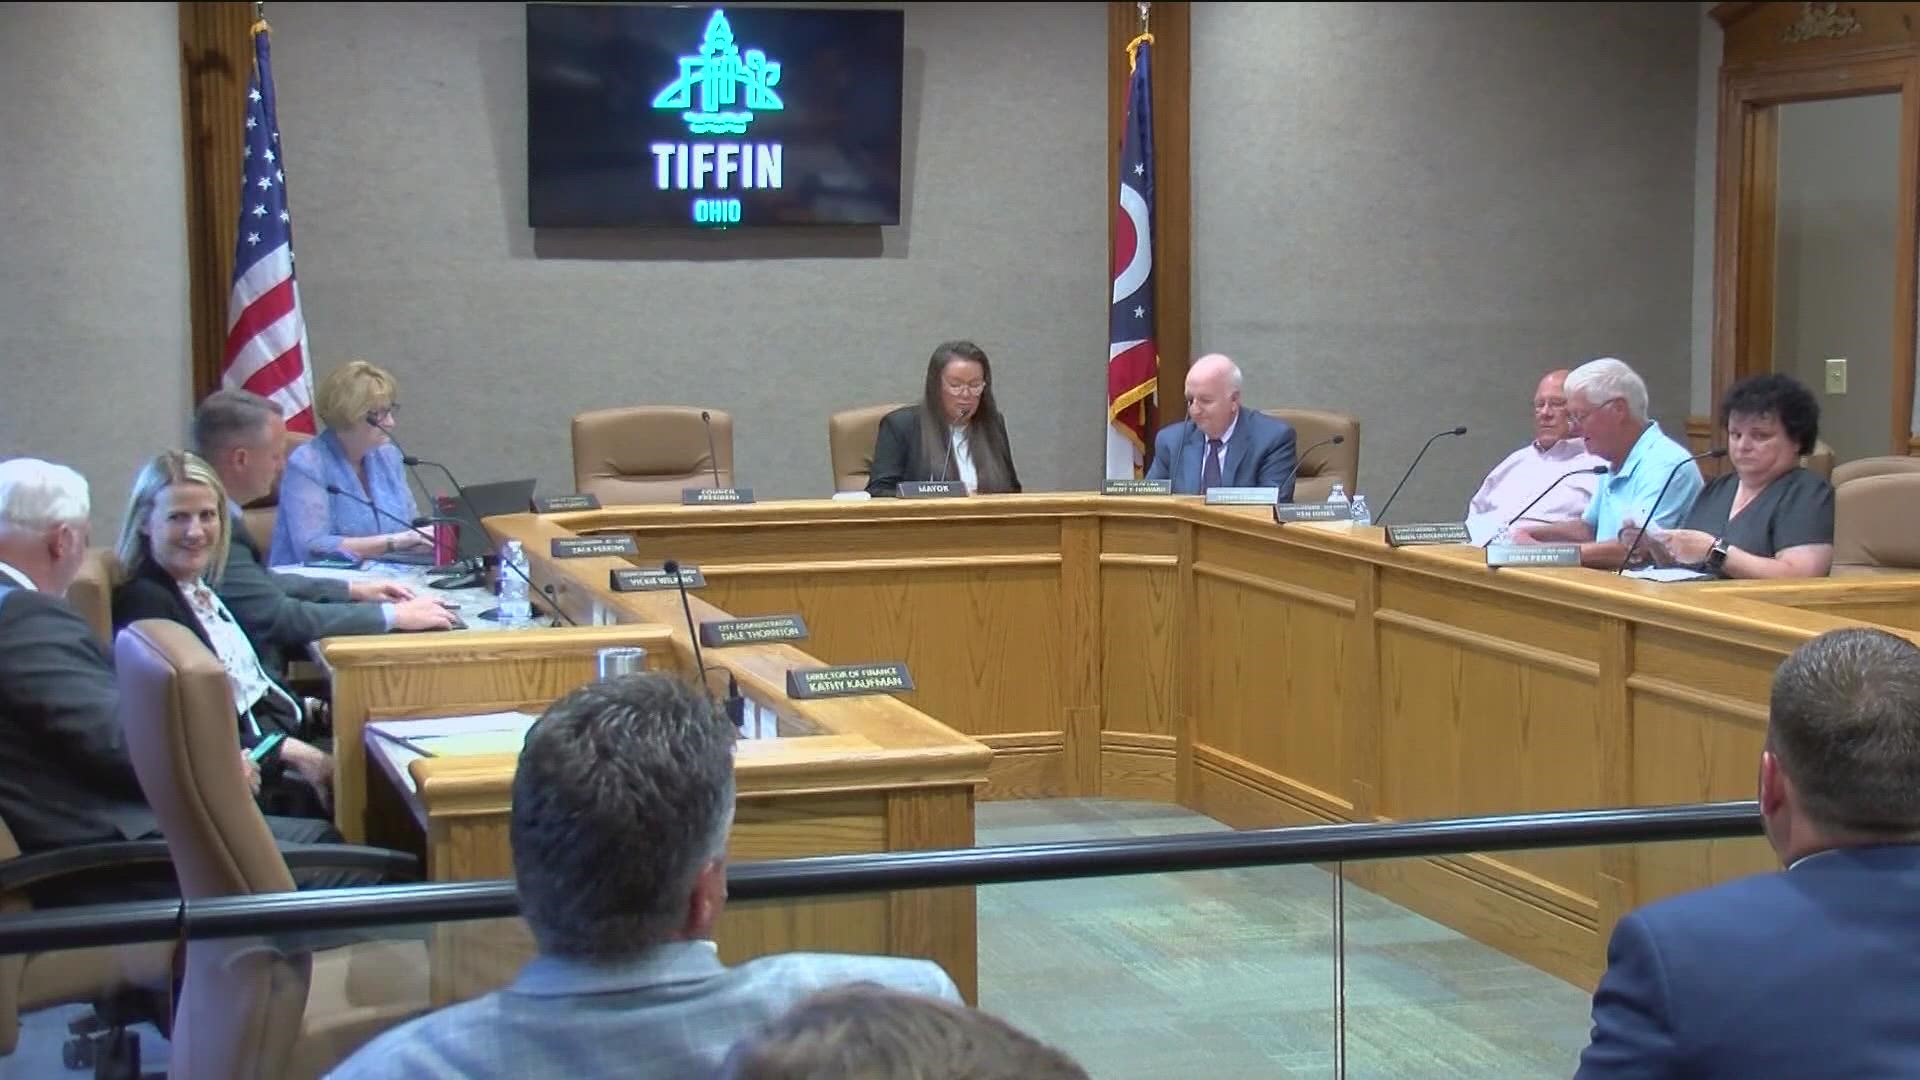 Tiffin is without a mayor again after Zack Perkins backs out of the job following accusations of sexual misconduct.